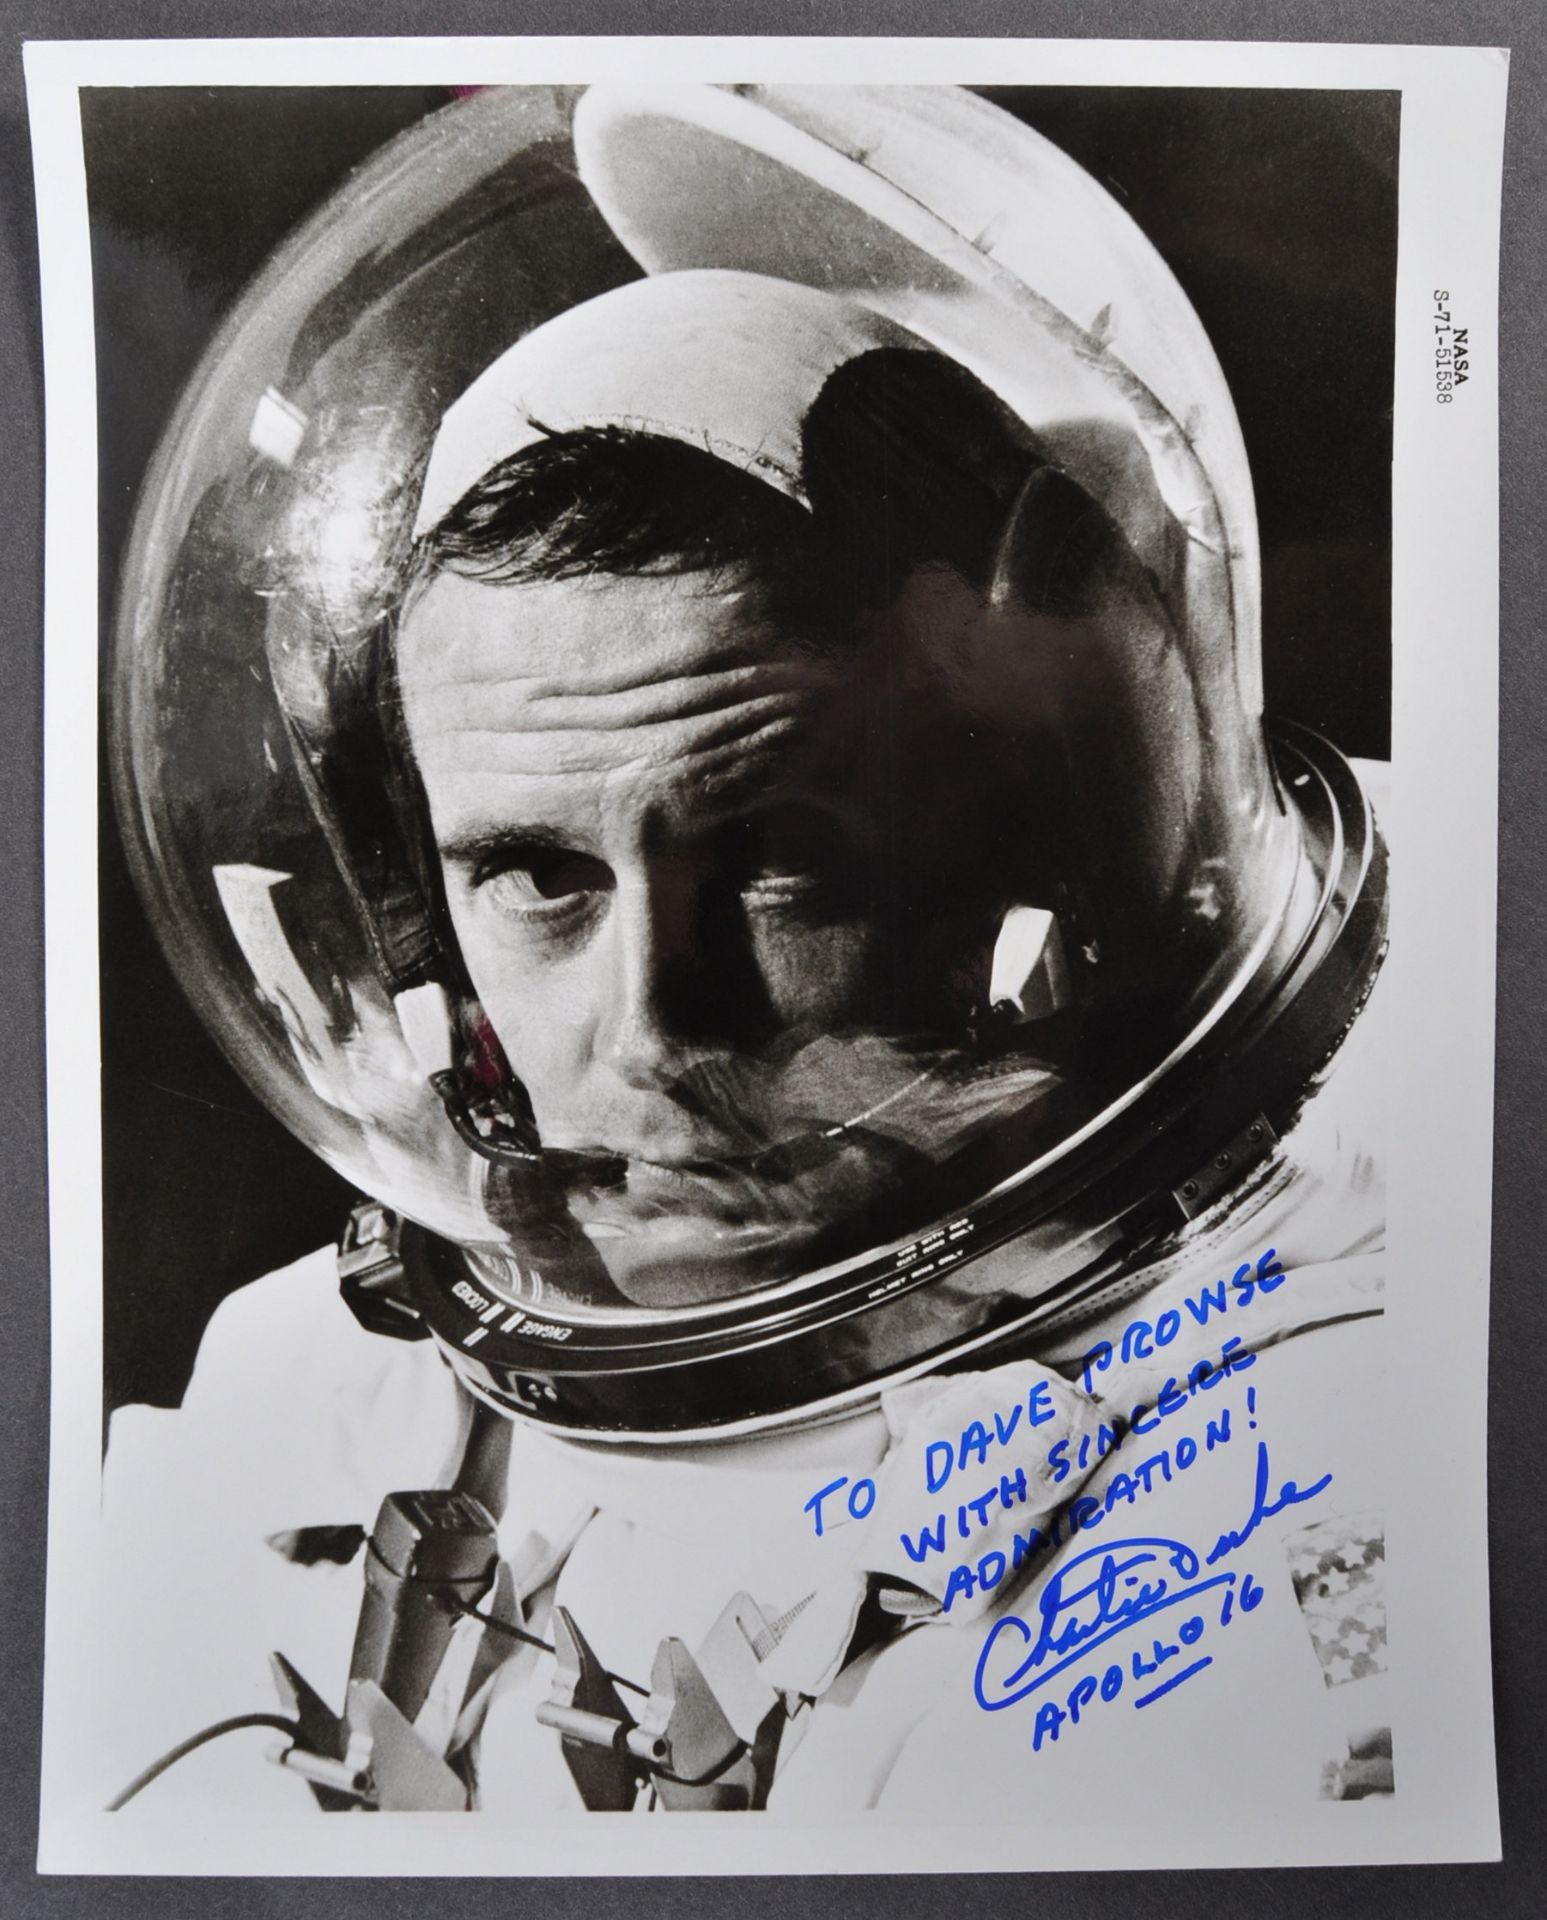 ESTATE OF DAVE PROWSE - CHARLES DUKE ASTRONAUT - DEDICATED AUTOGRAPH